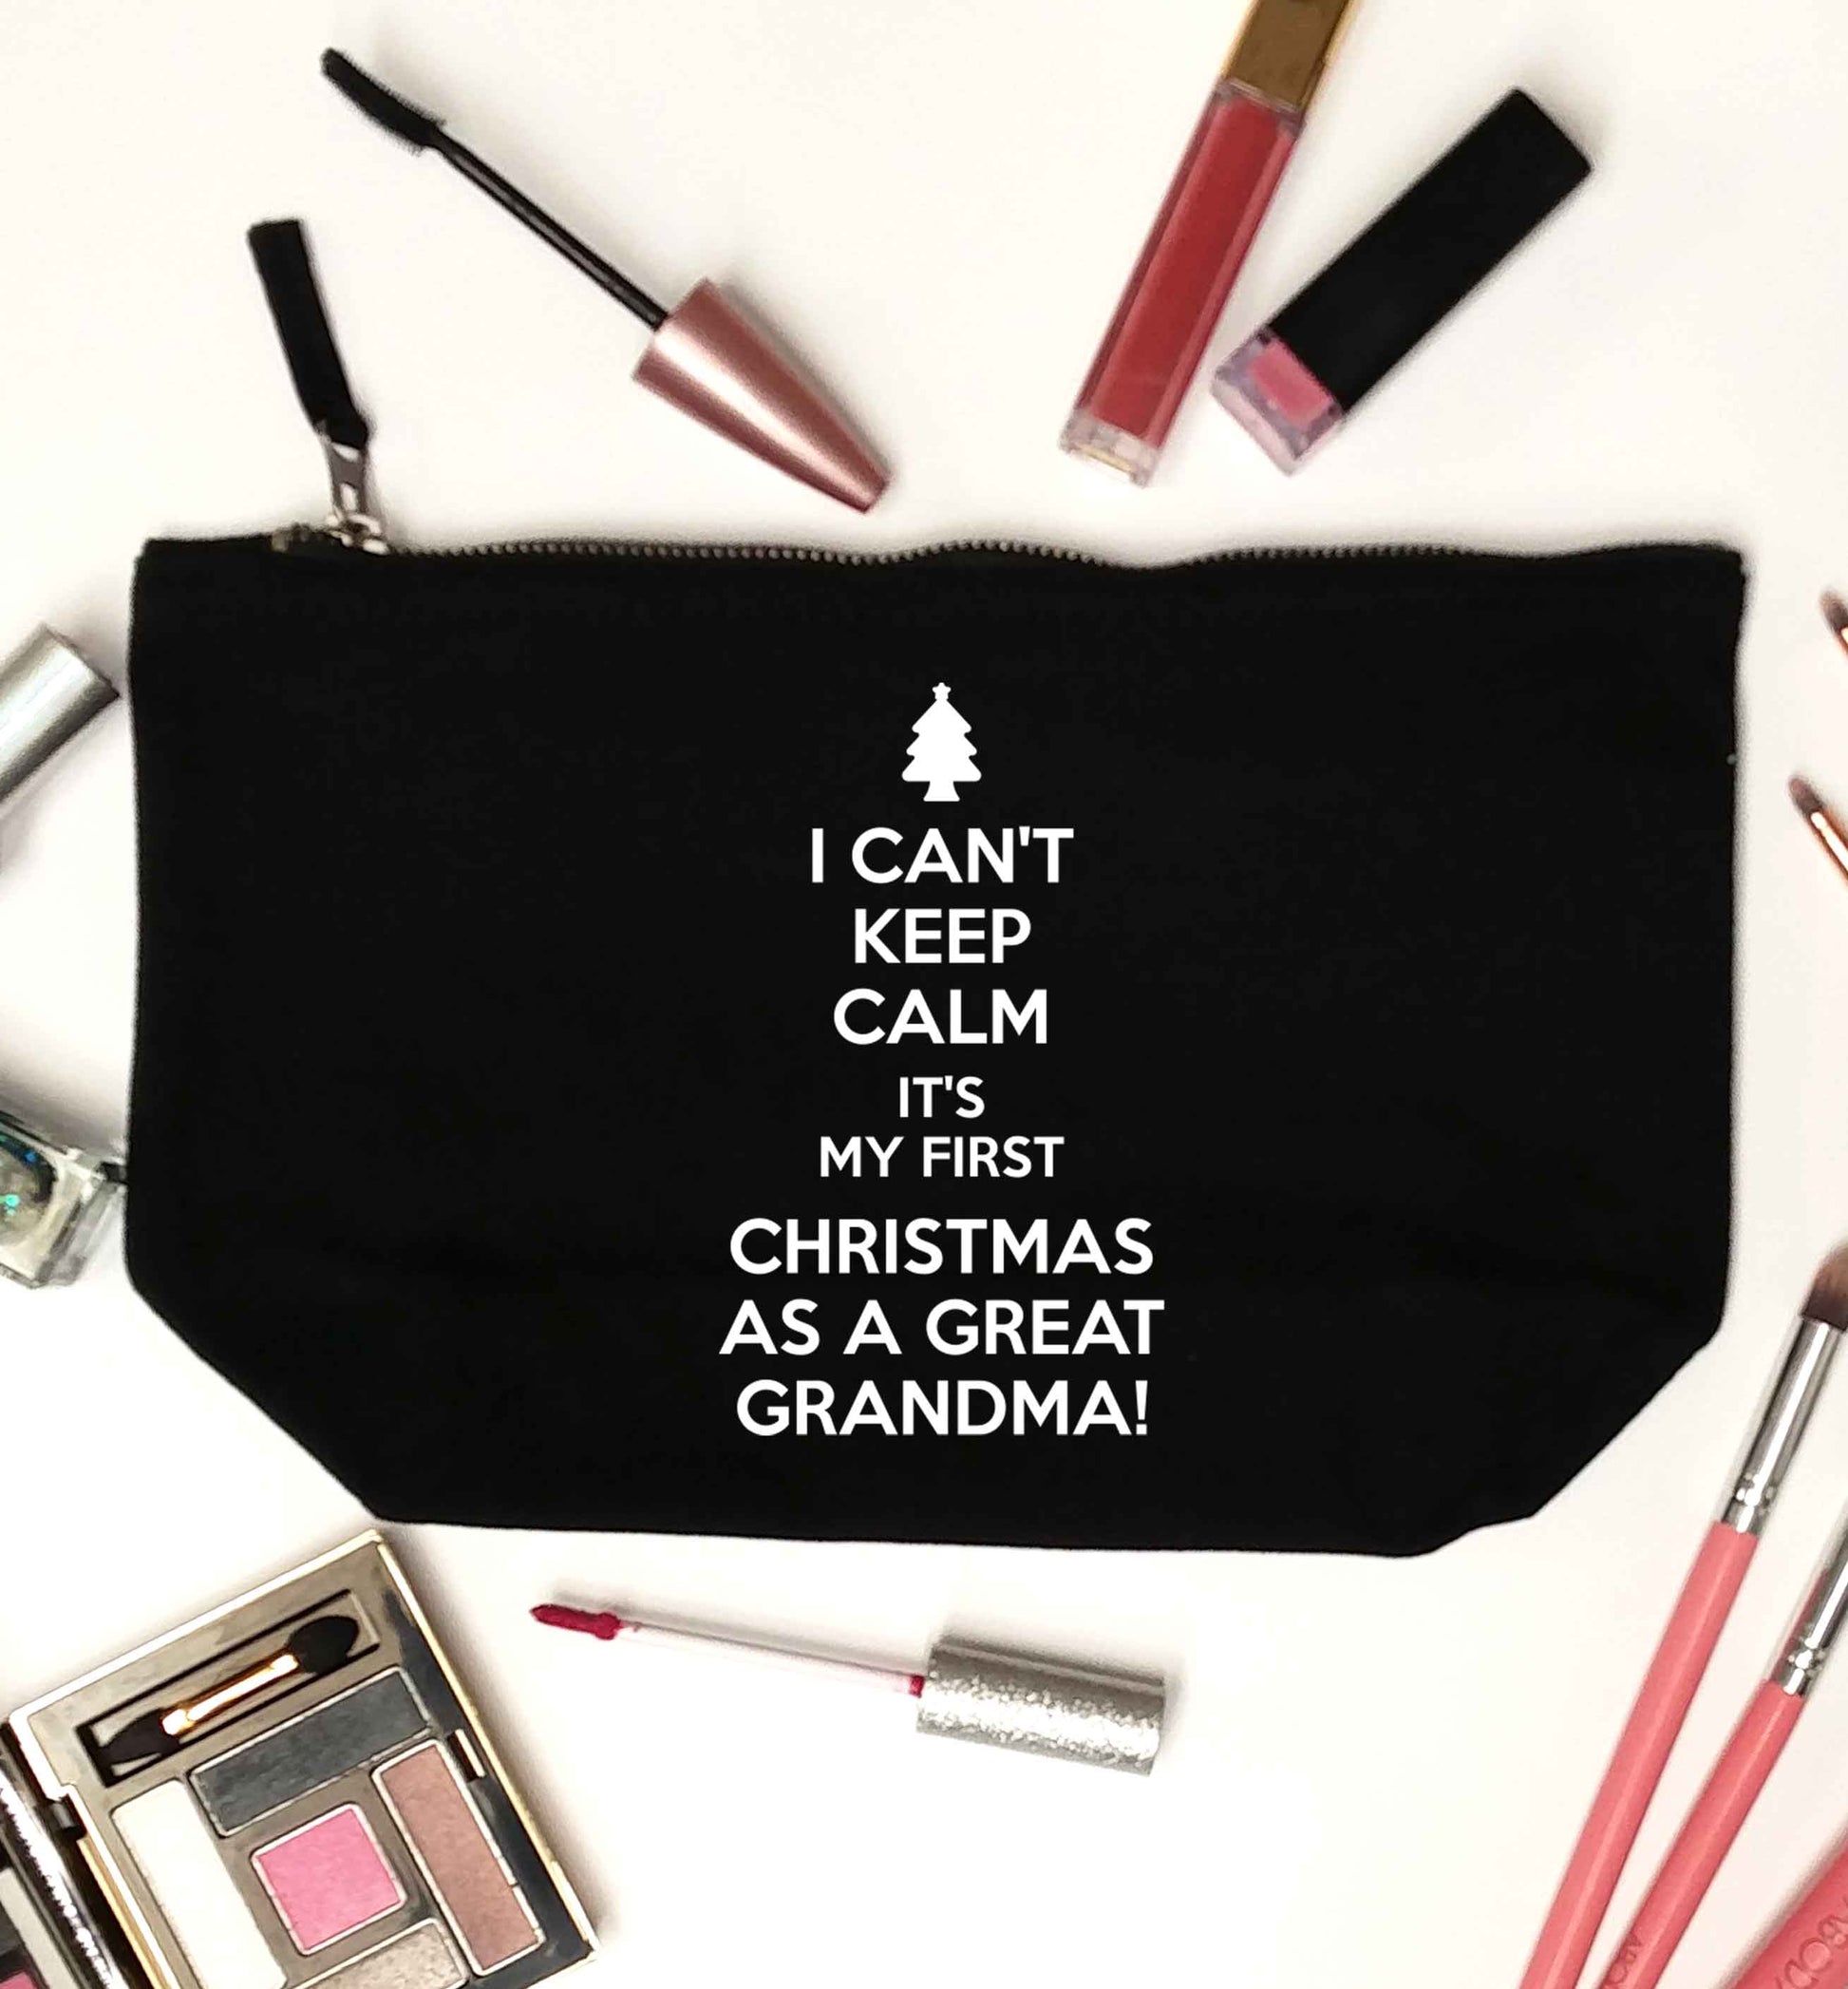 I can't keep calm it's my first Christmas as a great grandma! black makeup bag